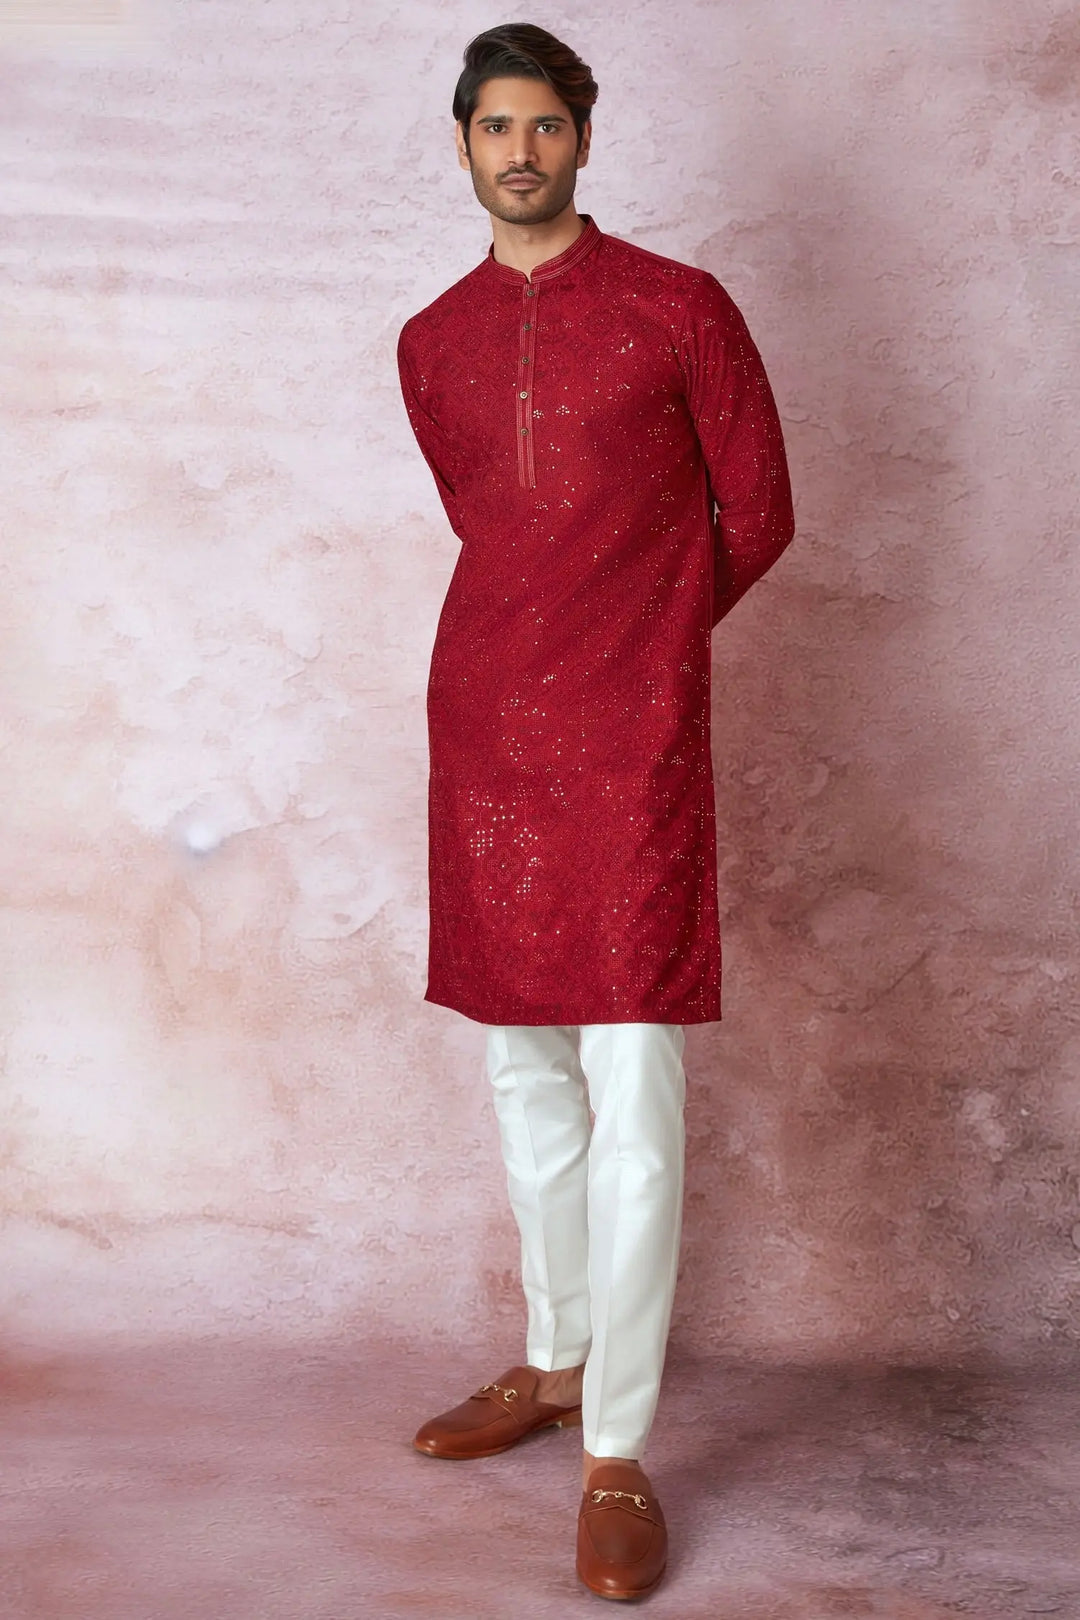 Red Radiance: Chanderi Silk Kurta with Resham and Sequins, Cross Stitch Embroidery - Asuka Couture